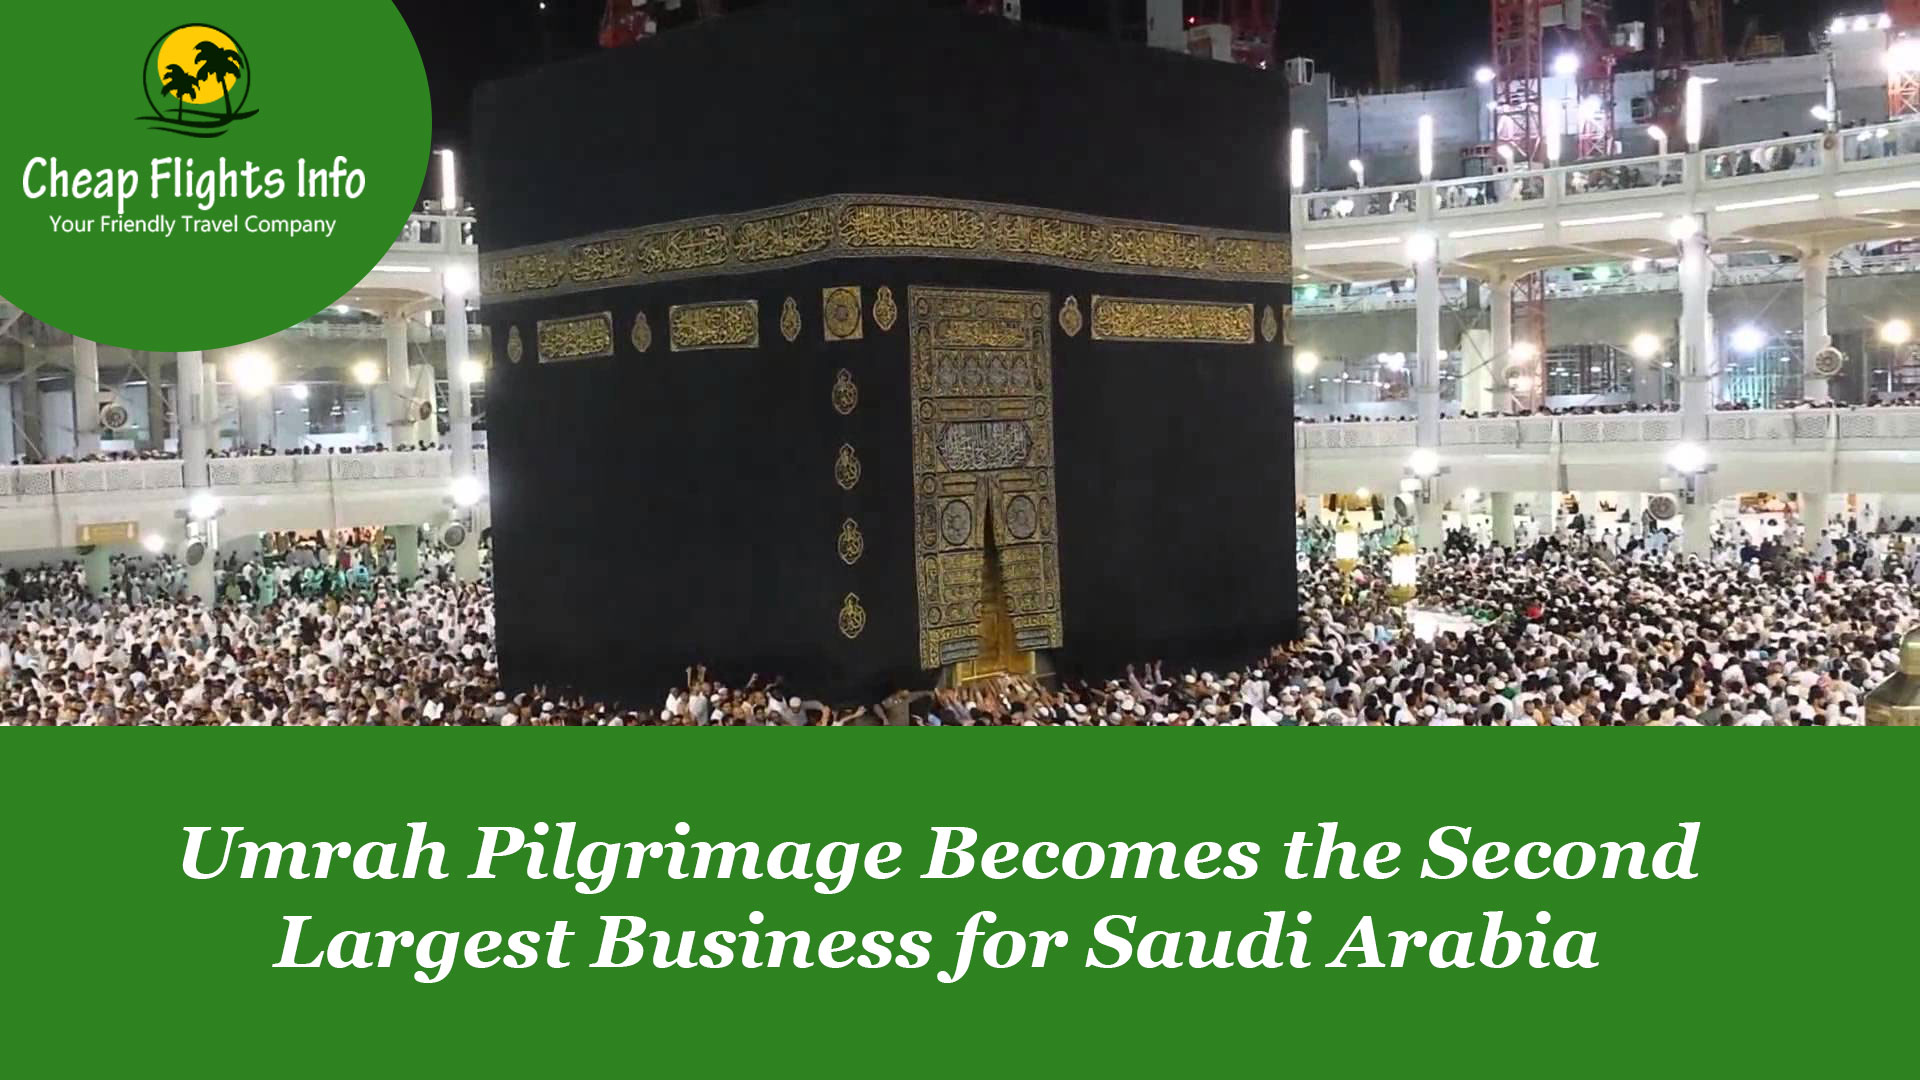 Umrah-Pilgrimage-Becomes-the-Second-Largest-Business-for-Saudi-Arabia